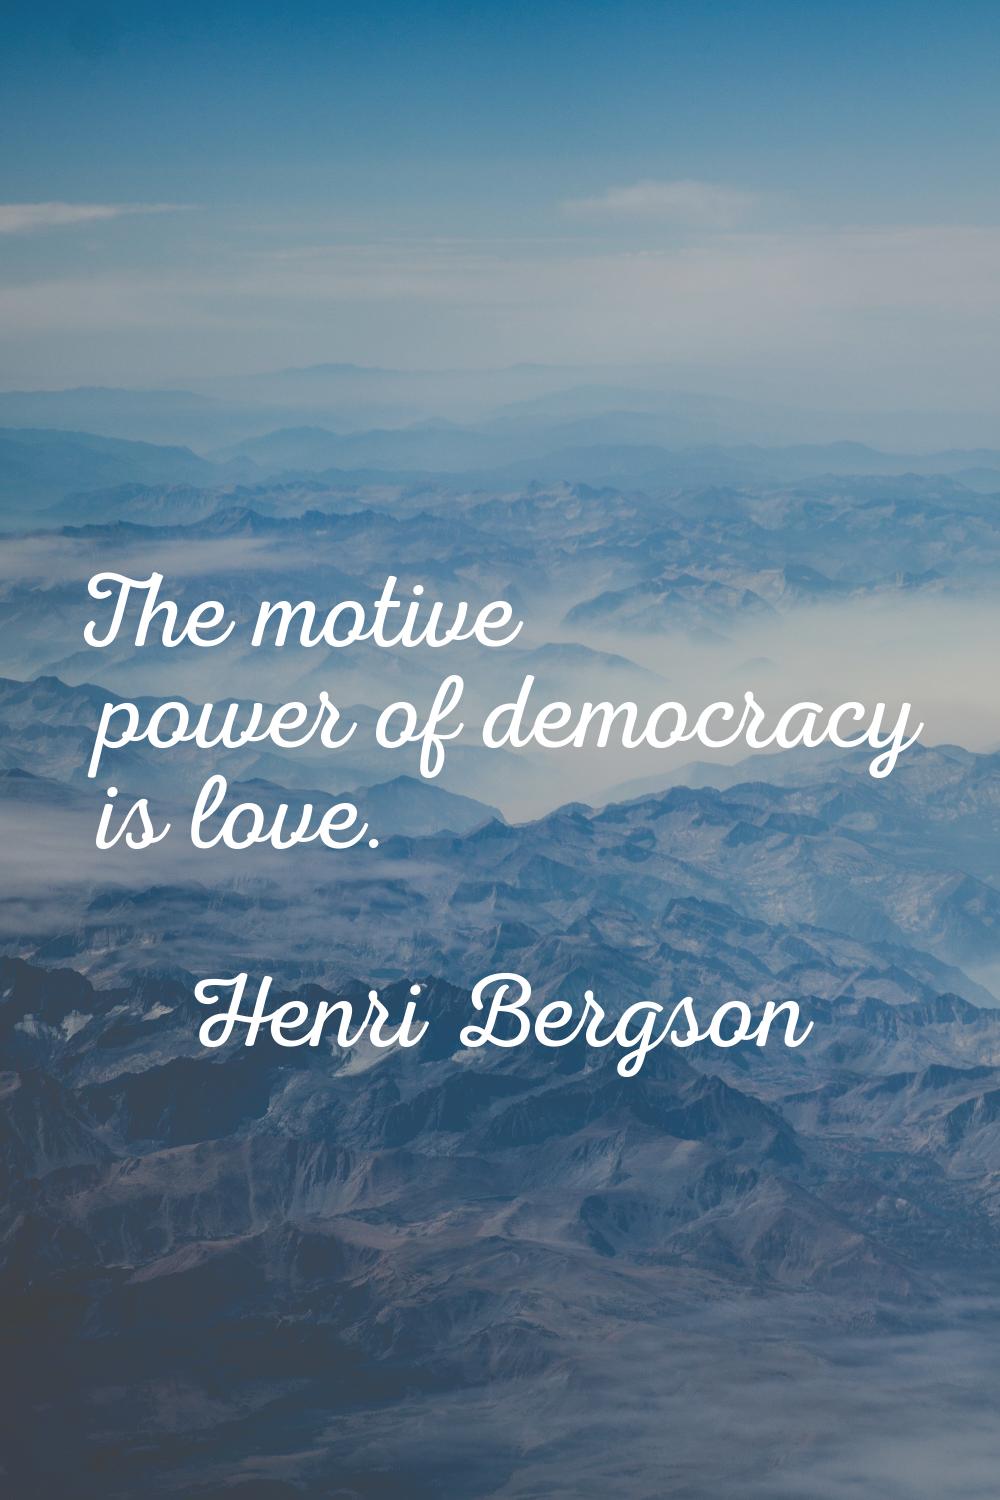 The motive power of democracy is love.